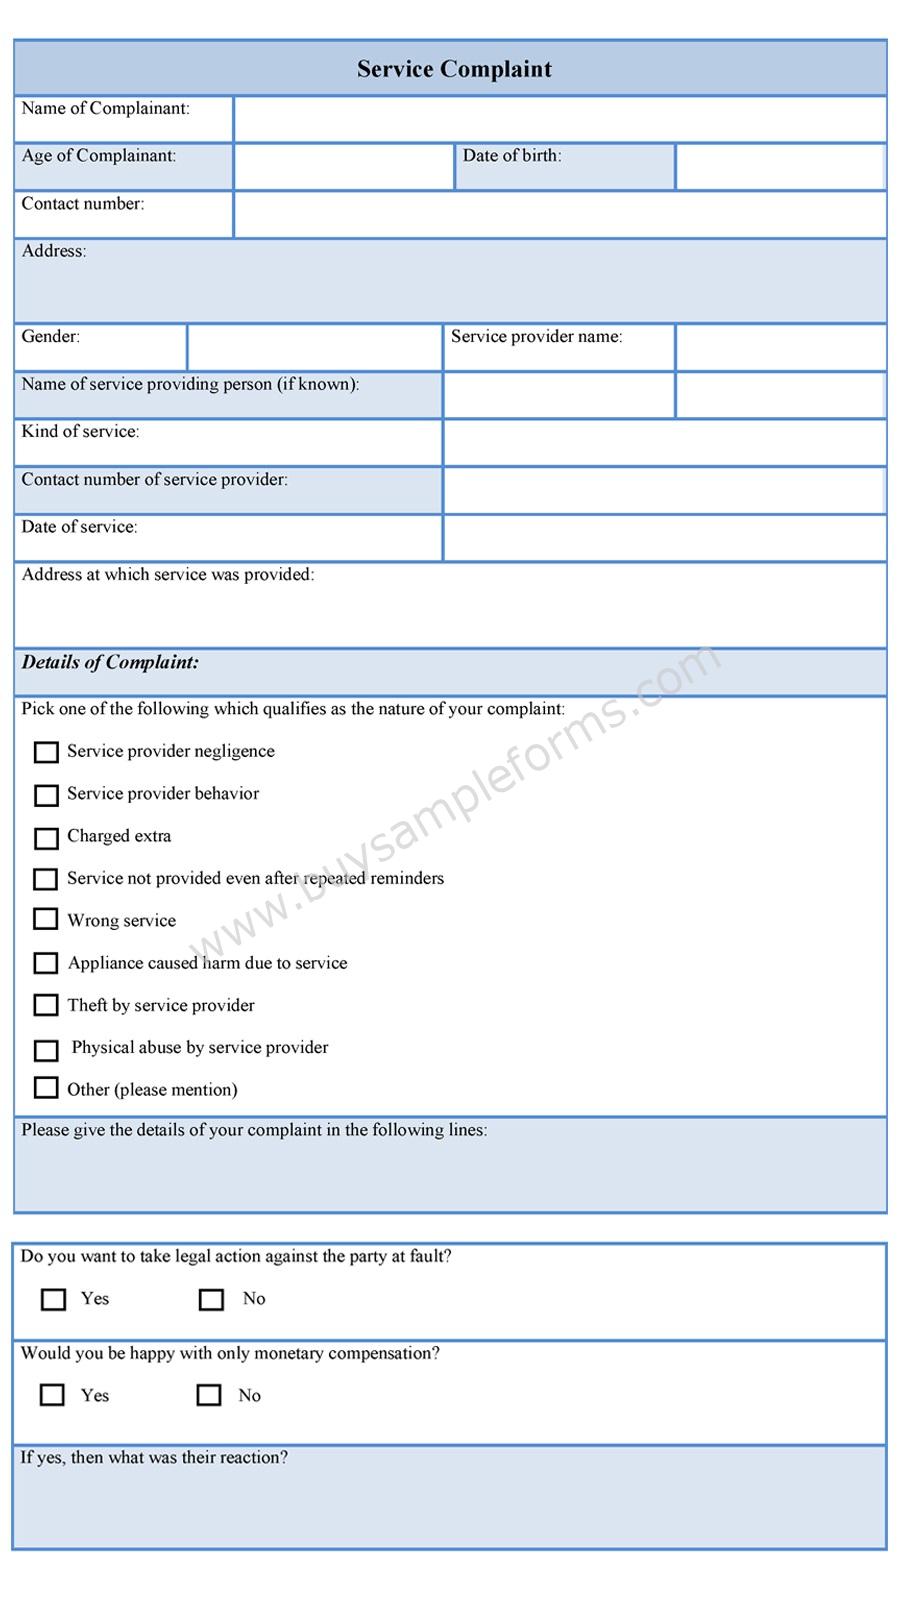 Service Complaint Form Template, Example